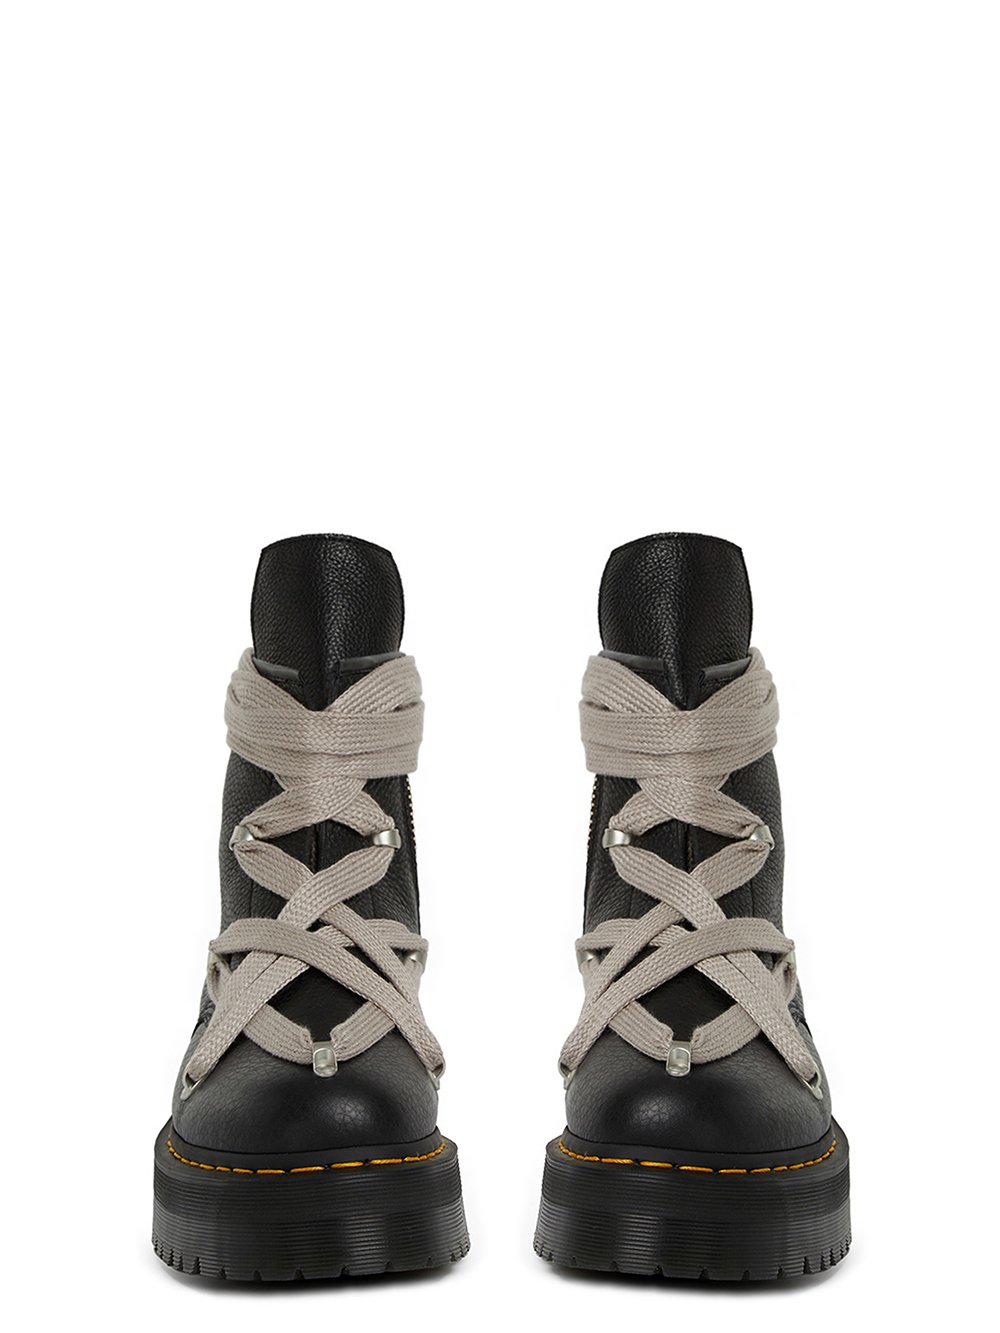 DR. MARTENS x RICK OWENS FW22 STROBE 1460 DR MARTENS BLACK BOOT IN MATTE GRAINY COW LEATHER. 